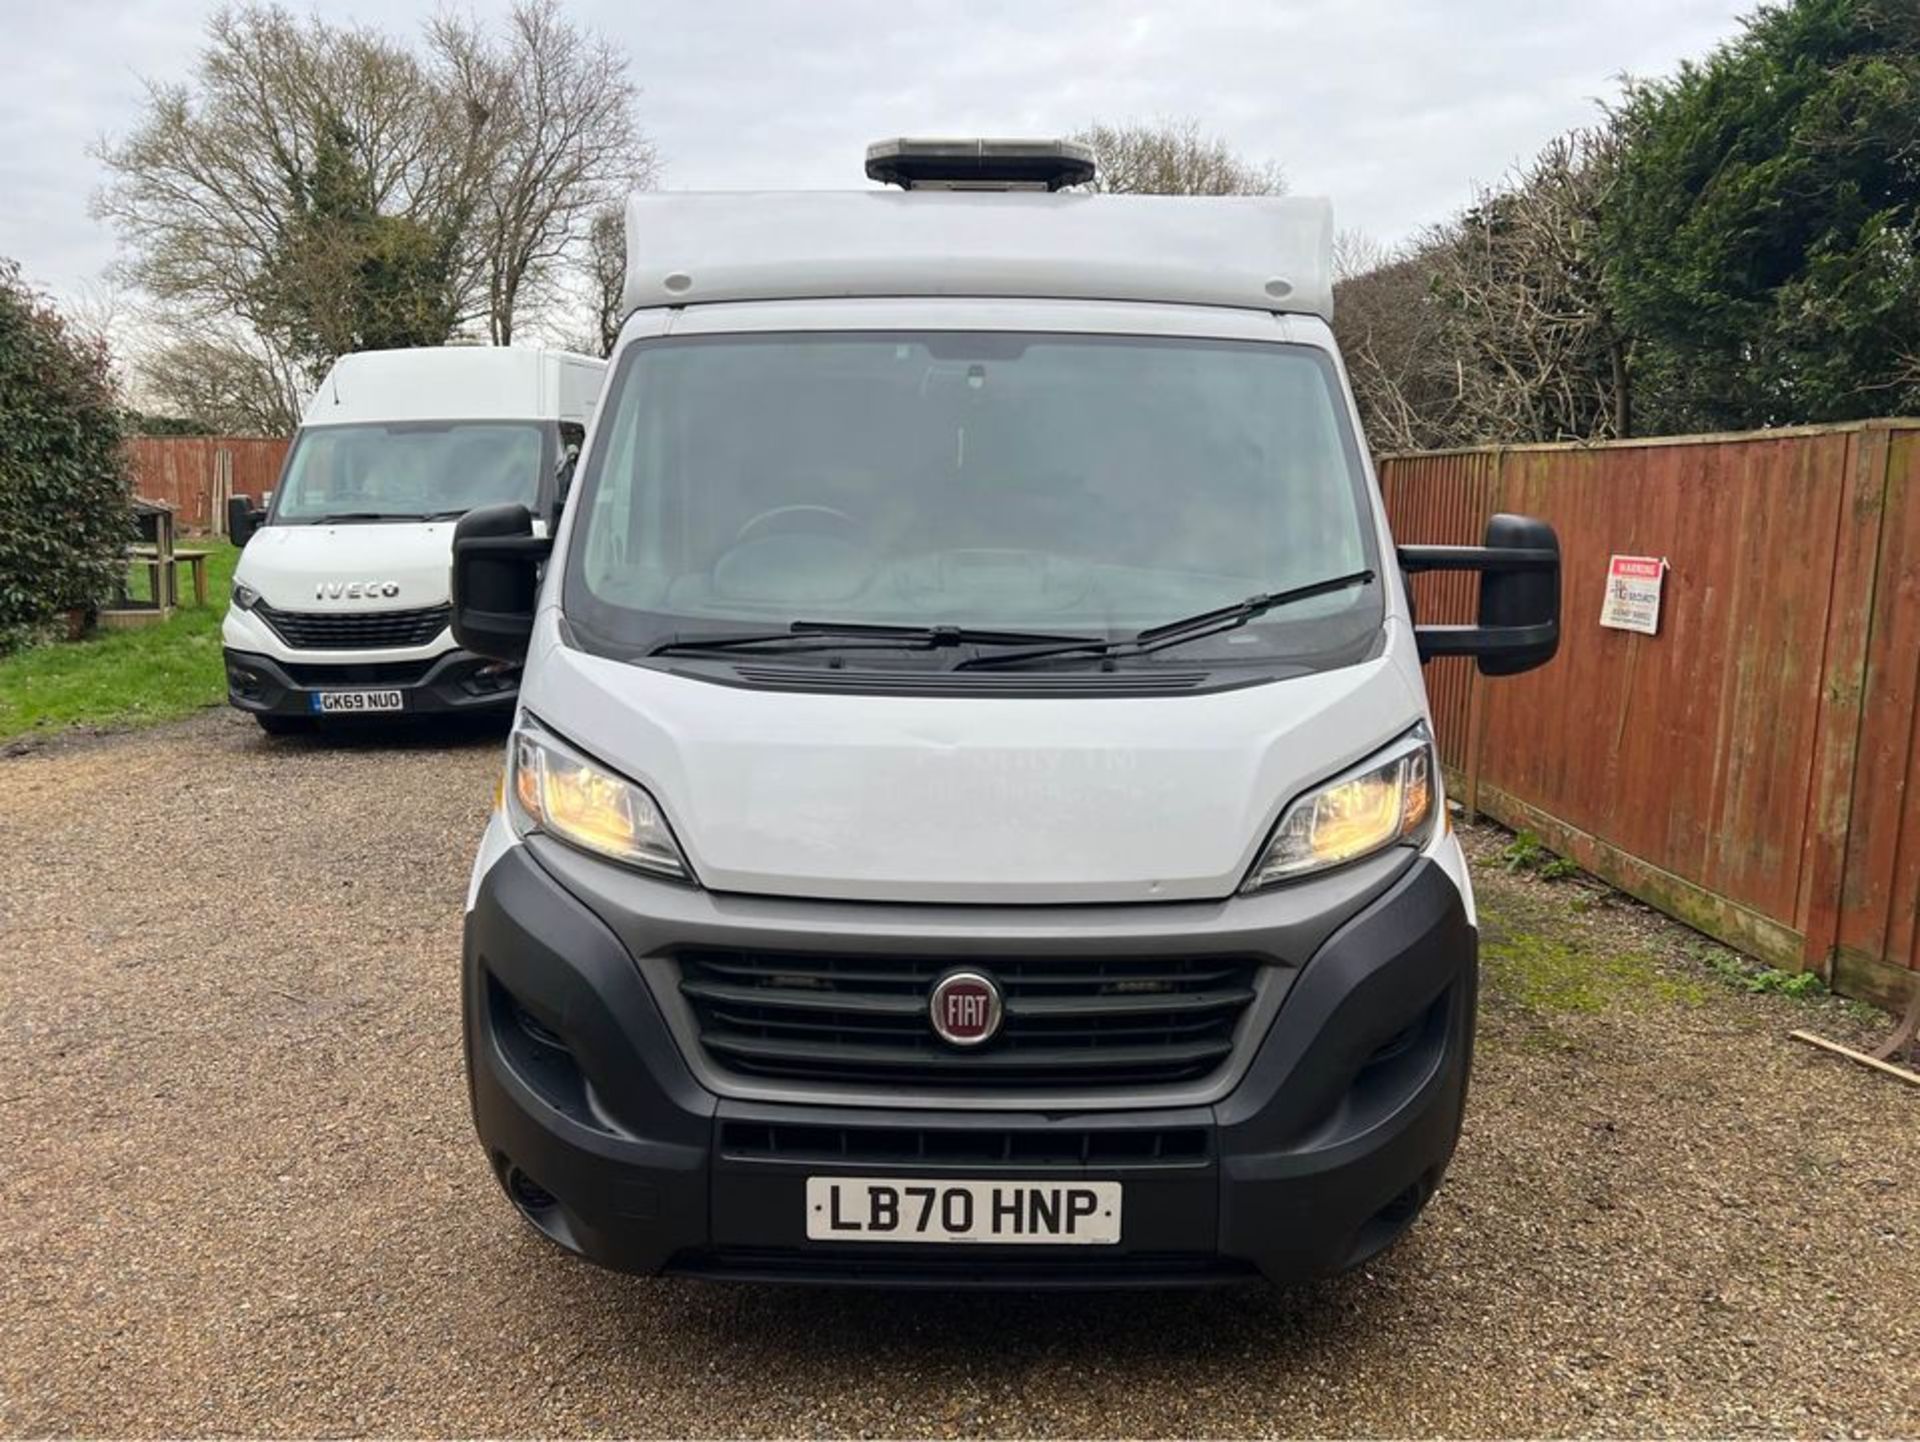 2021, FIAT Ducato 2.3 TD - Low Load Dropside (Traffic Management Truck) - Image 3 of 14